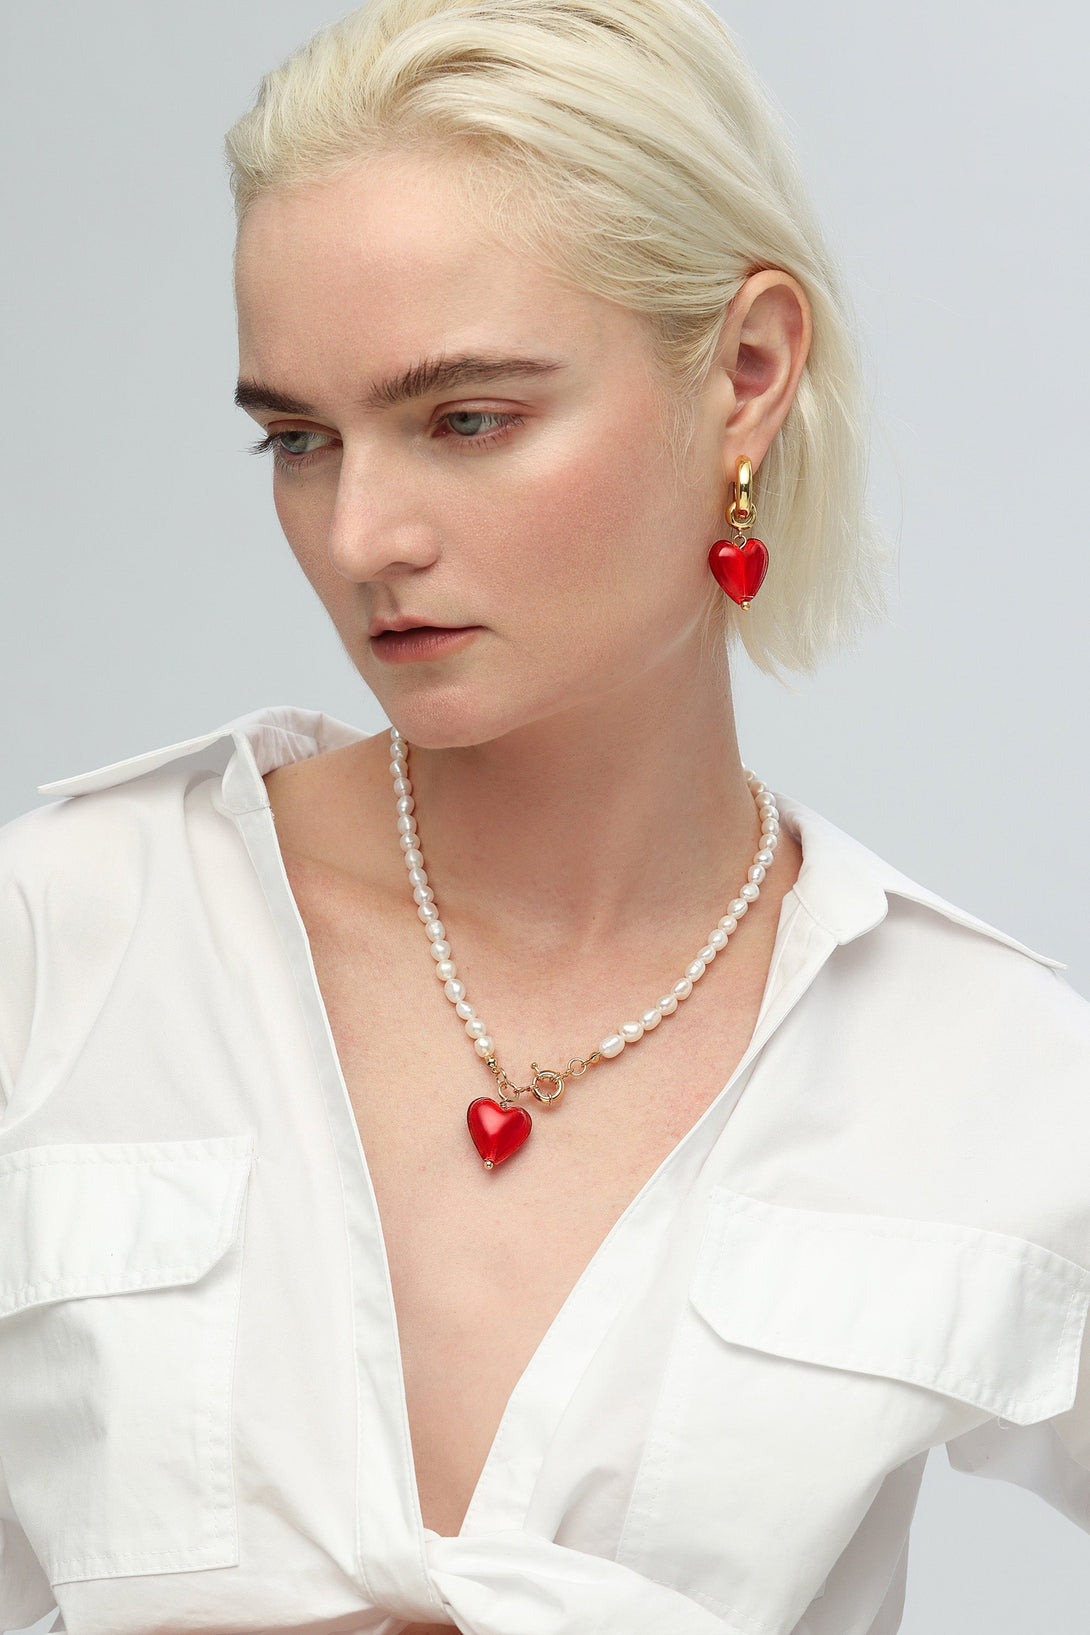 Esmée Red Glaze Heart Pendant Pearl Necklace and Earrings Set - Classicharms